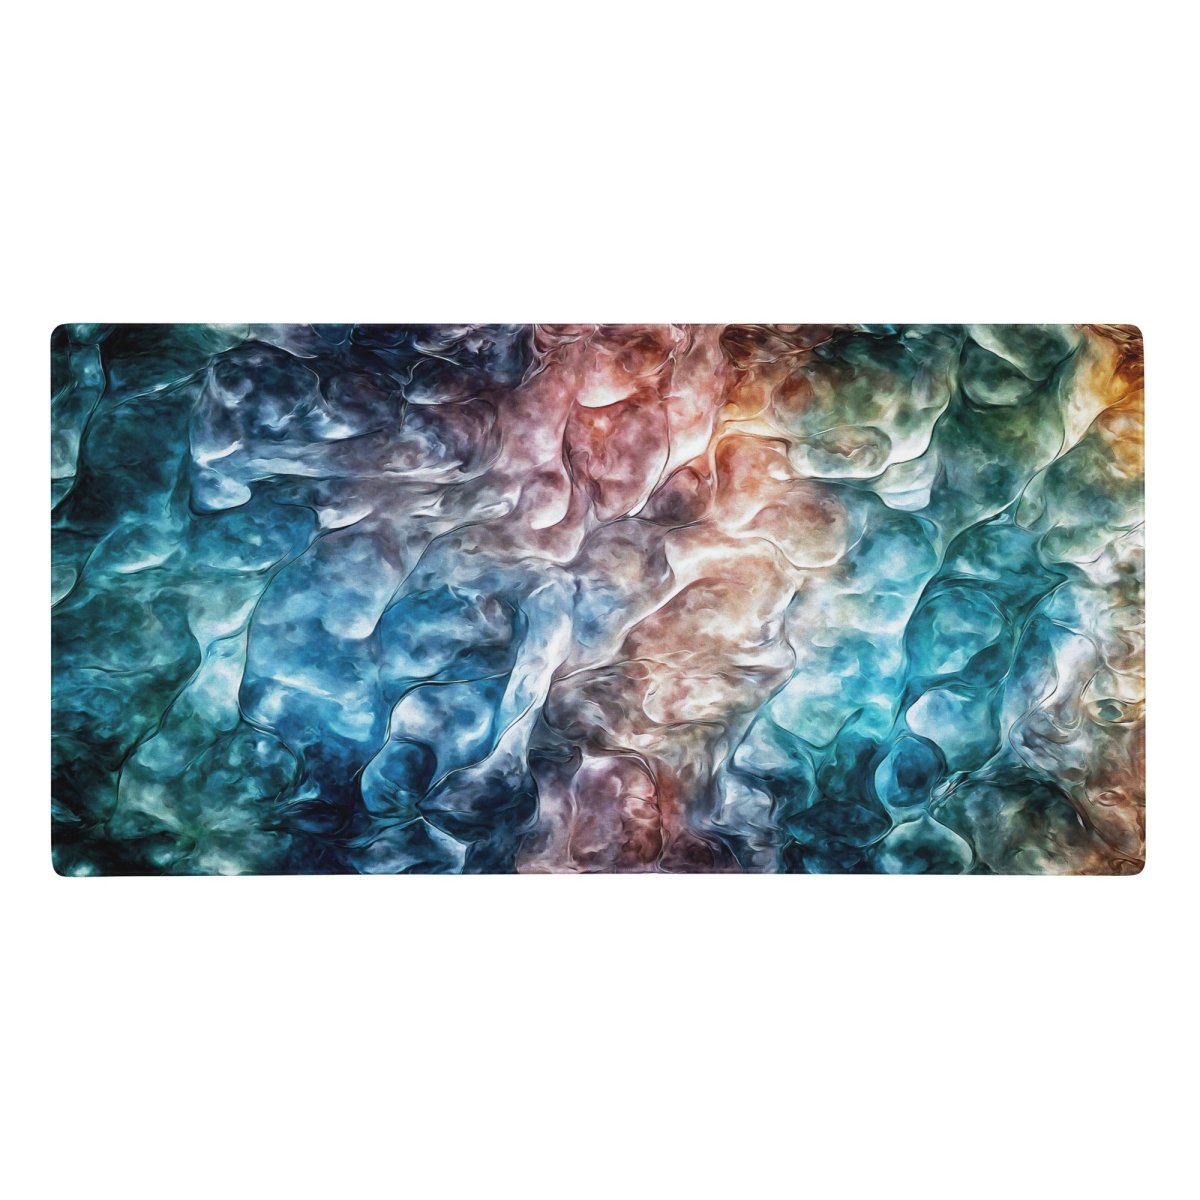 Bubbling colours - Gaming mouse pad - Ever colorful